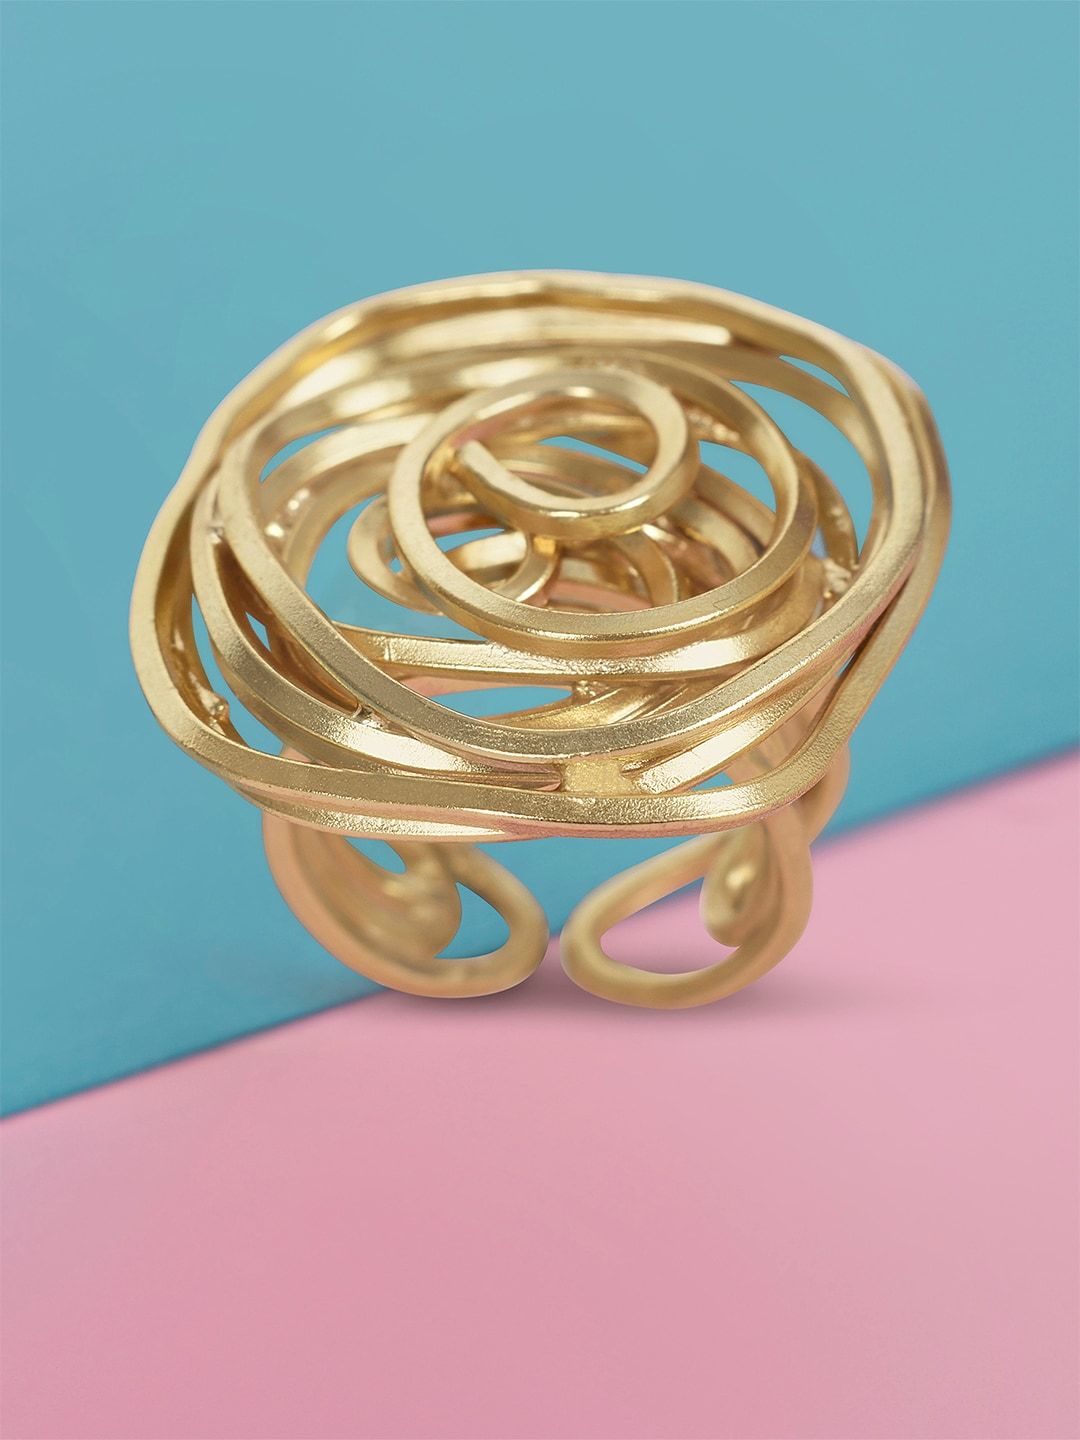 Mikoto by FableStreet Gold-Plated Coiled Handcrafted Finger Ring Price in India